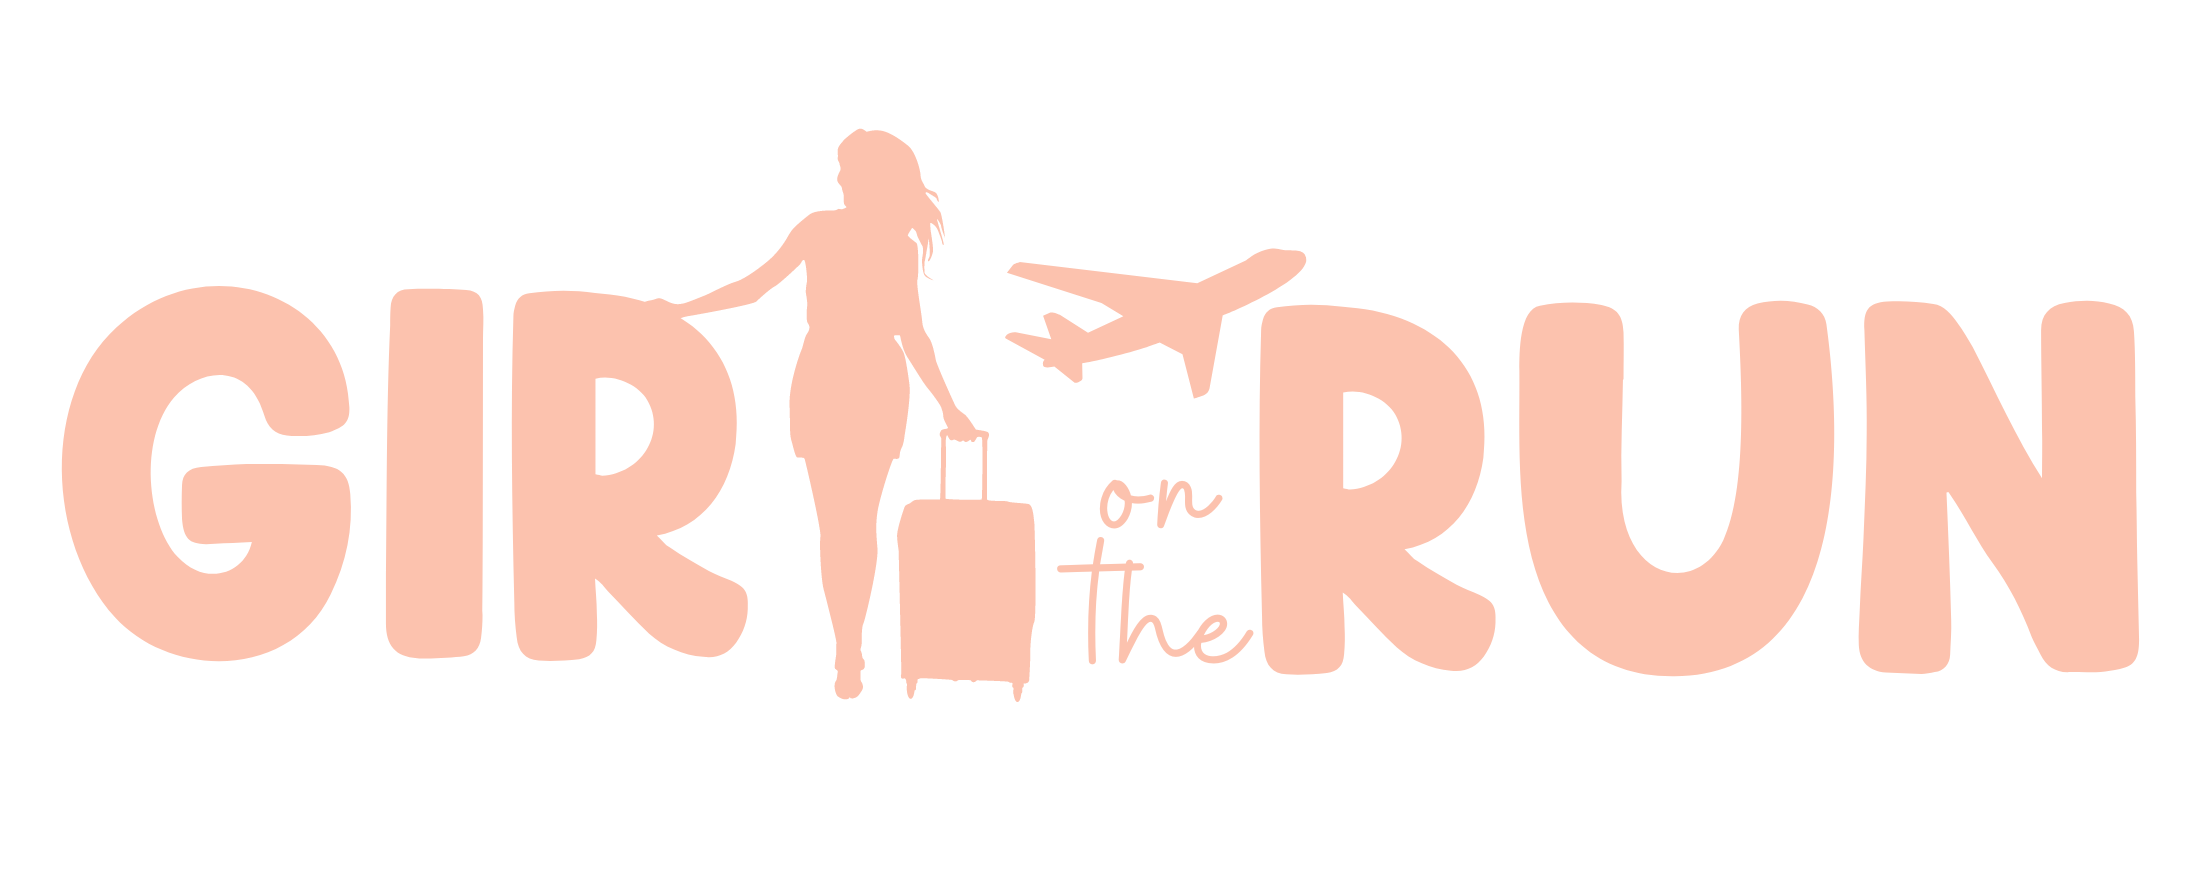 Peach colored logo for Girl on the Run